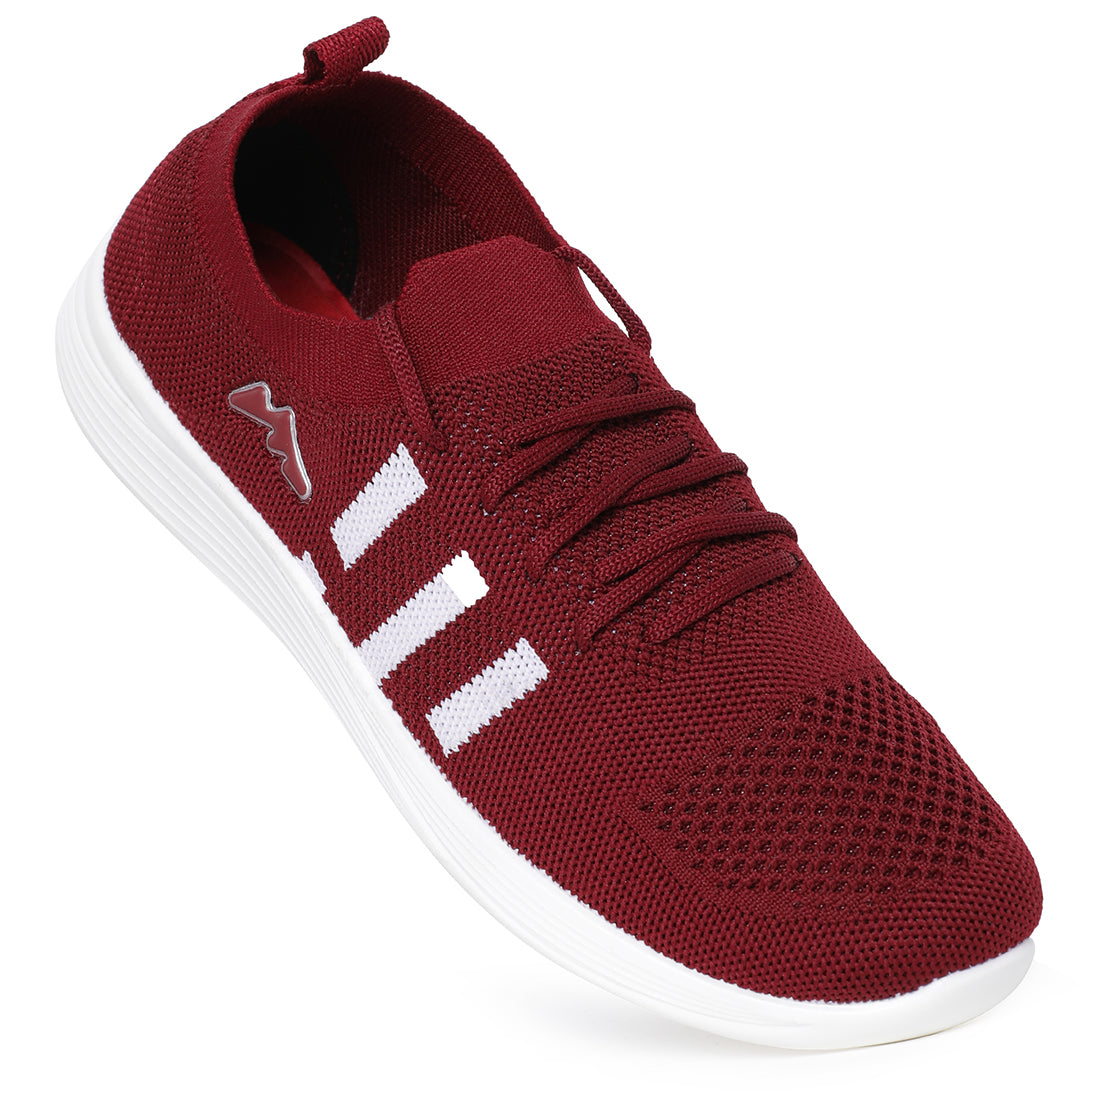 Stimulus PUSTL5022AP Maroon Stylish Daily Comfortable Casual Sneakers For Women